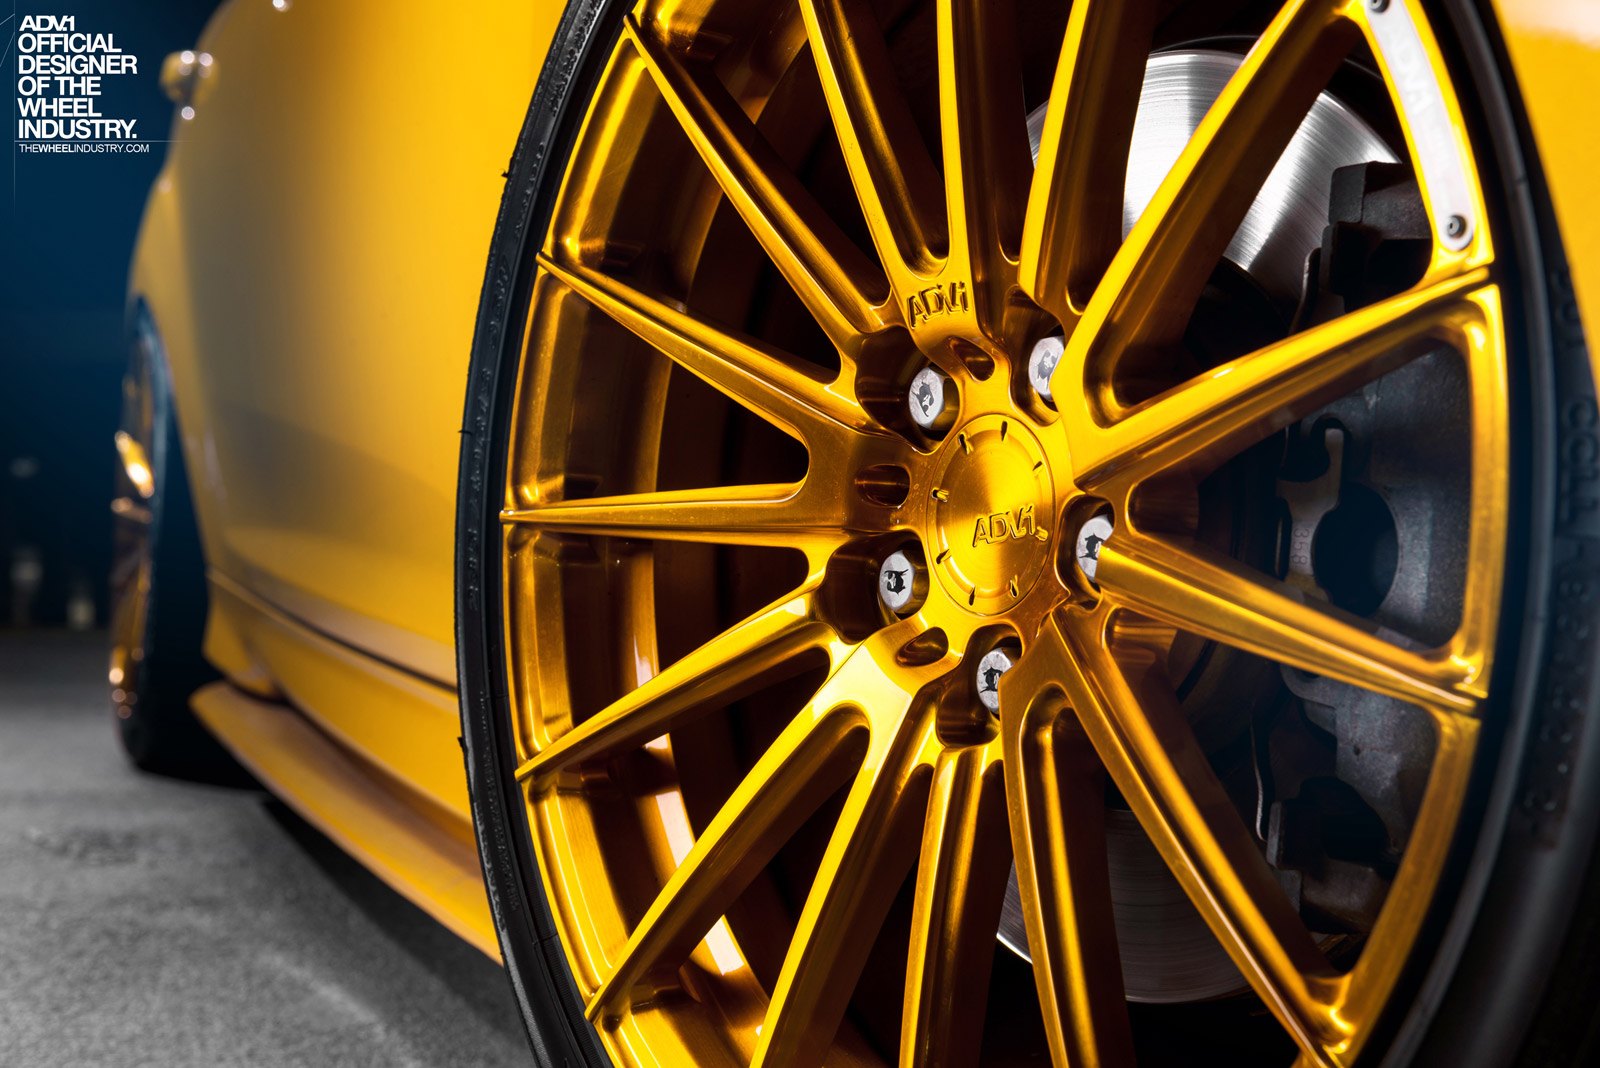 Candy Gold ADV1 Wheels on Yellow Ford Fiesta - Photo by ADV.1